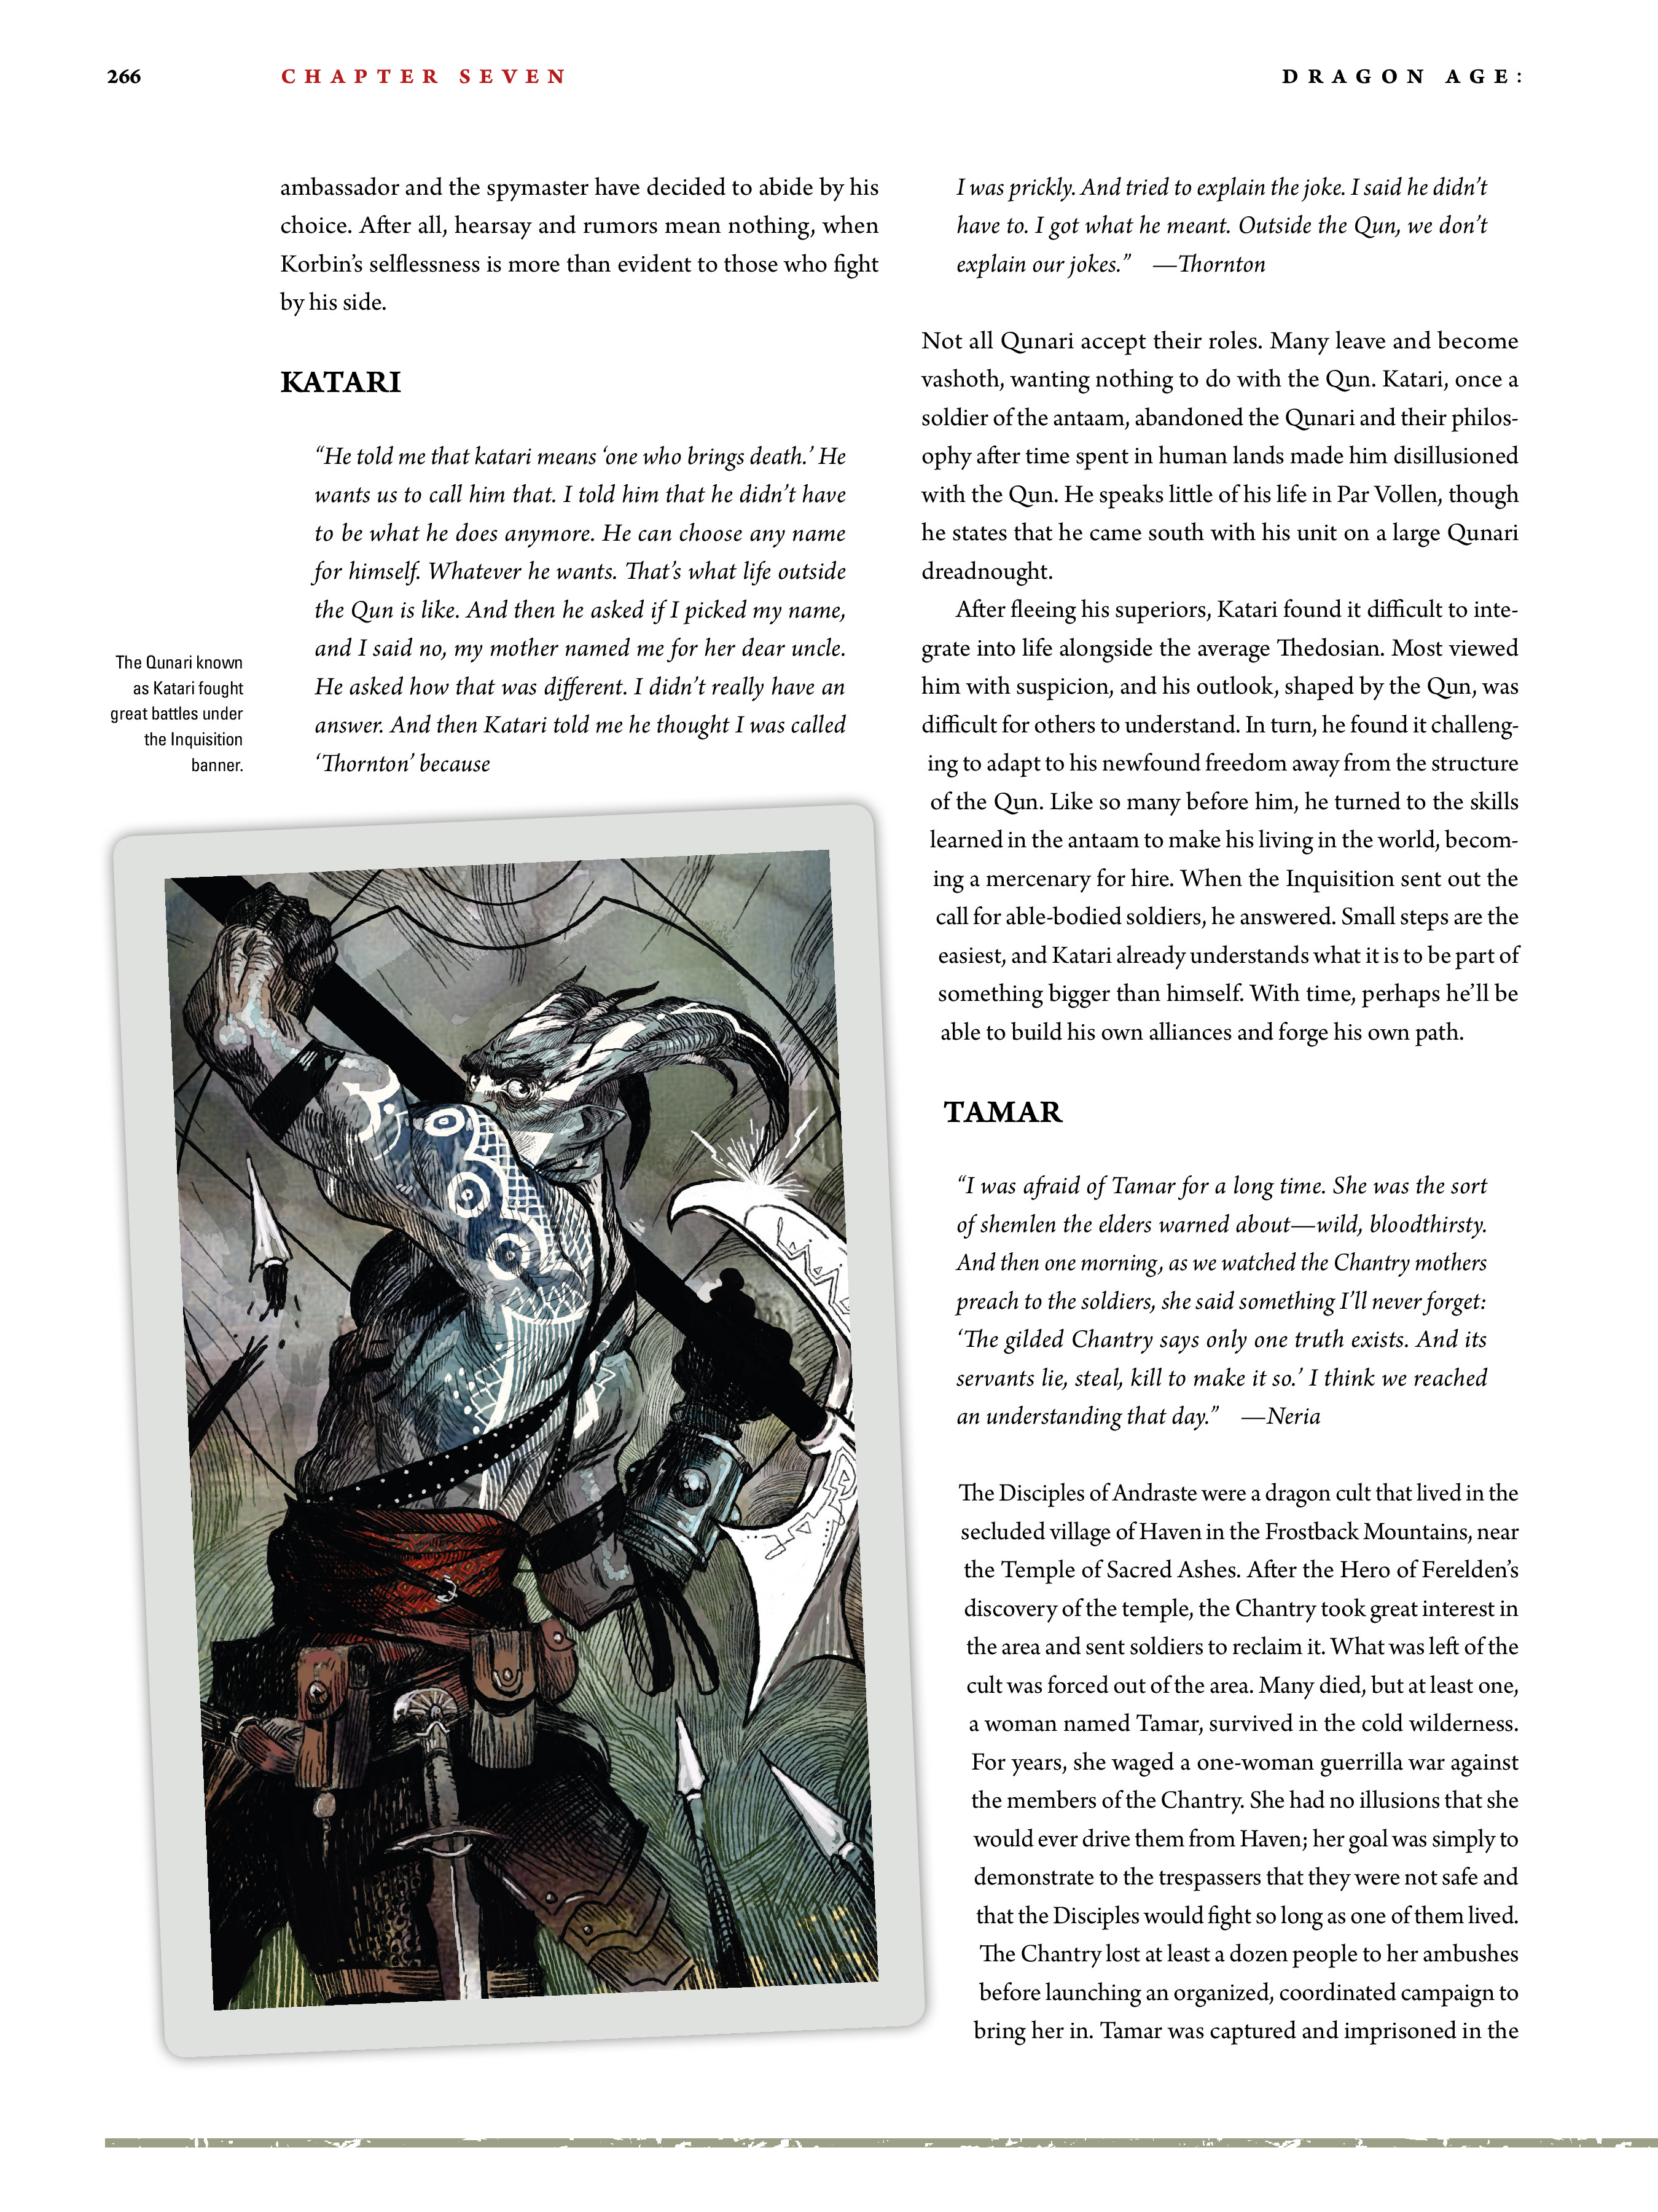 Read online Dragon Age: The World of Thedas comic -  Issue # TPB 2 - 259